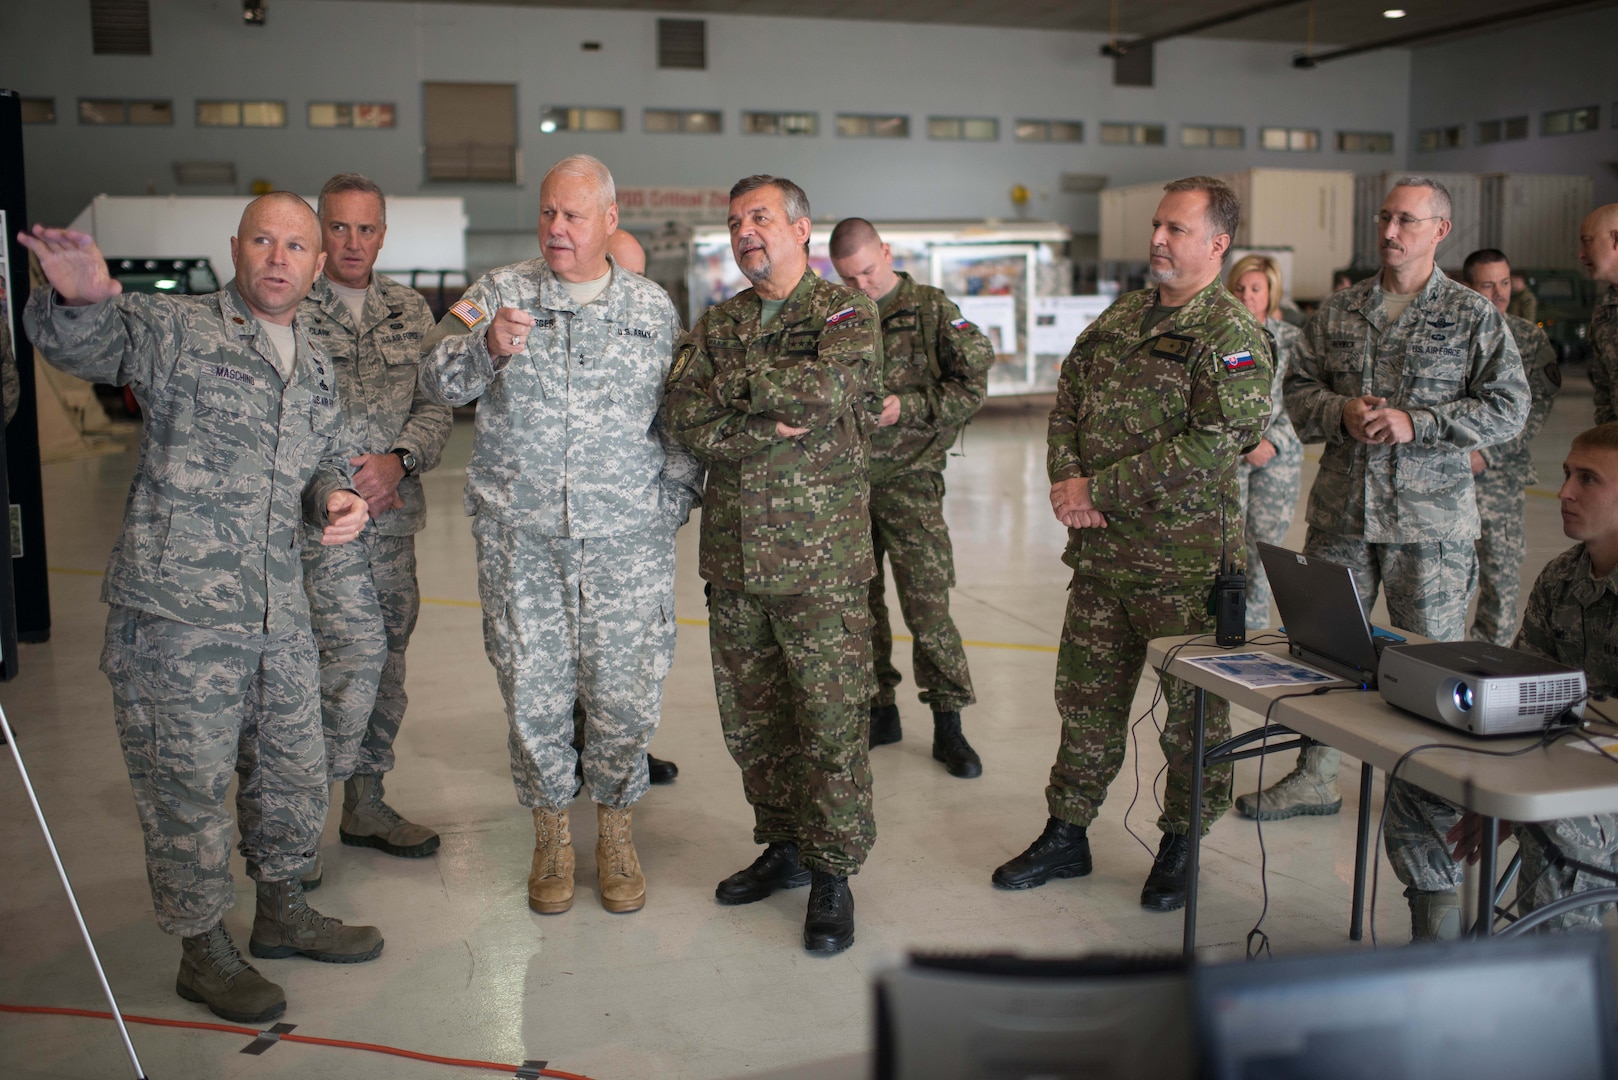 Maj. Craig Maschino briefly describes the capabilities of their thermal imaging system to the Indiana adjutant general, Maj. Gen. R. Martin Umbarger, and Slovakian Chief of Defense Lt. Gen. Milan Maxim as well as members of the Slovakian Army and Indiana National Guard. 